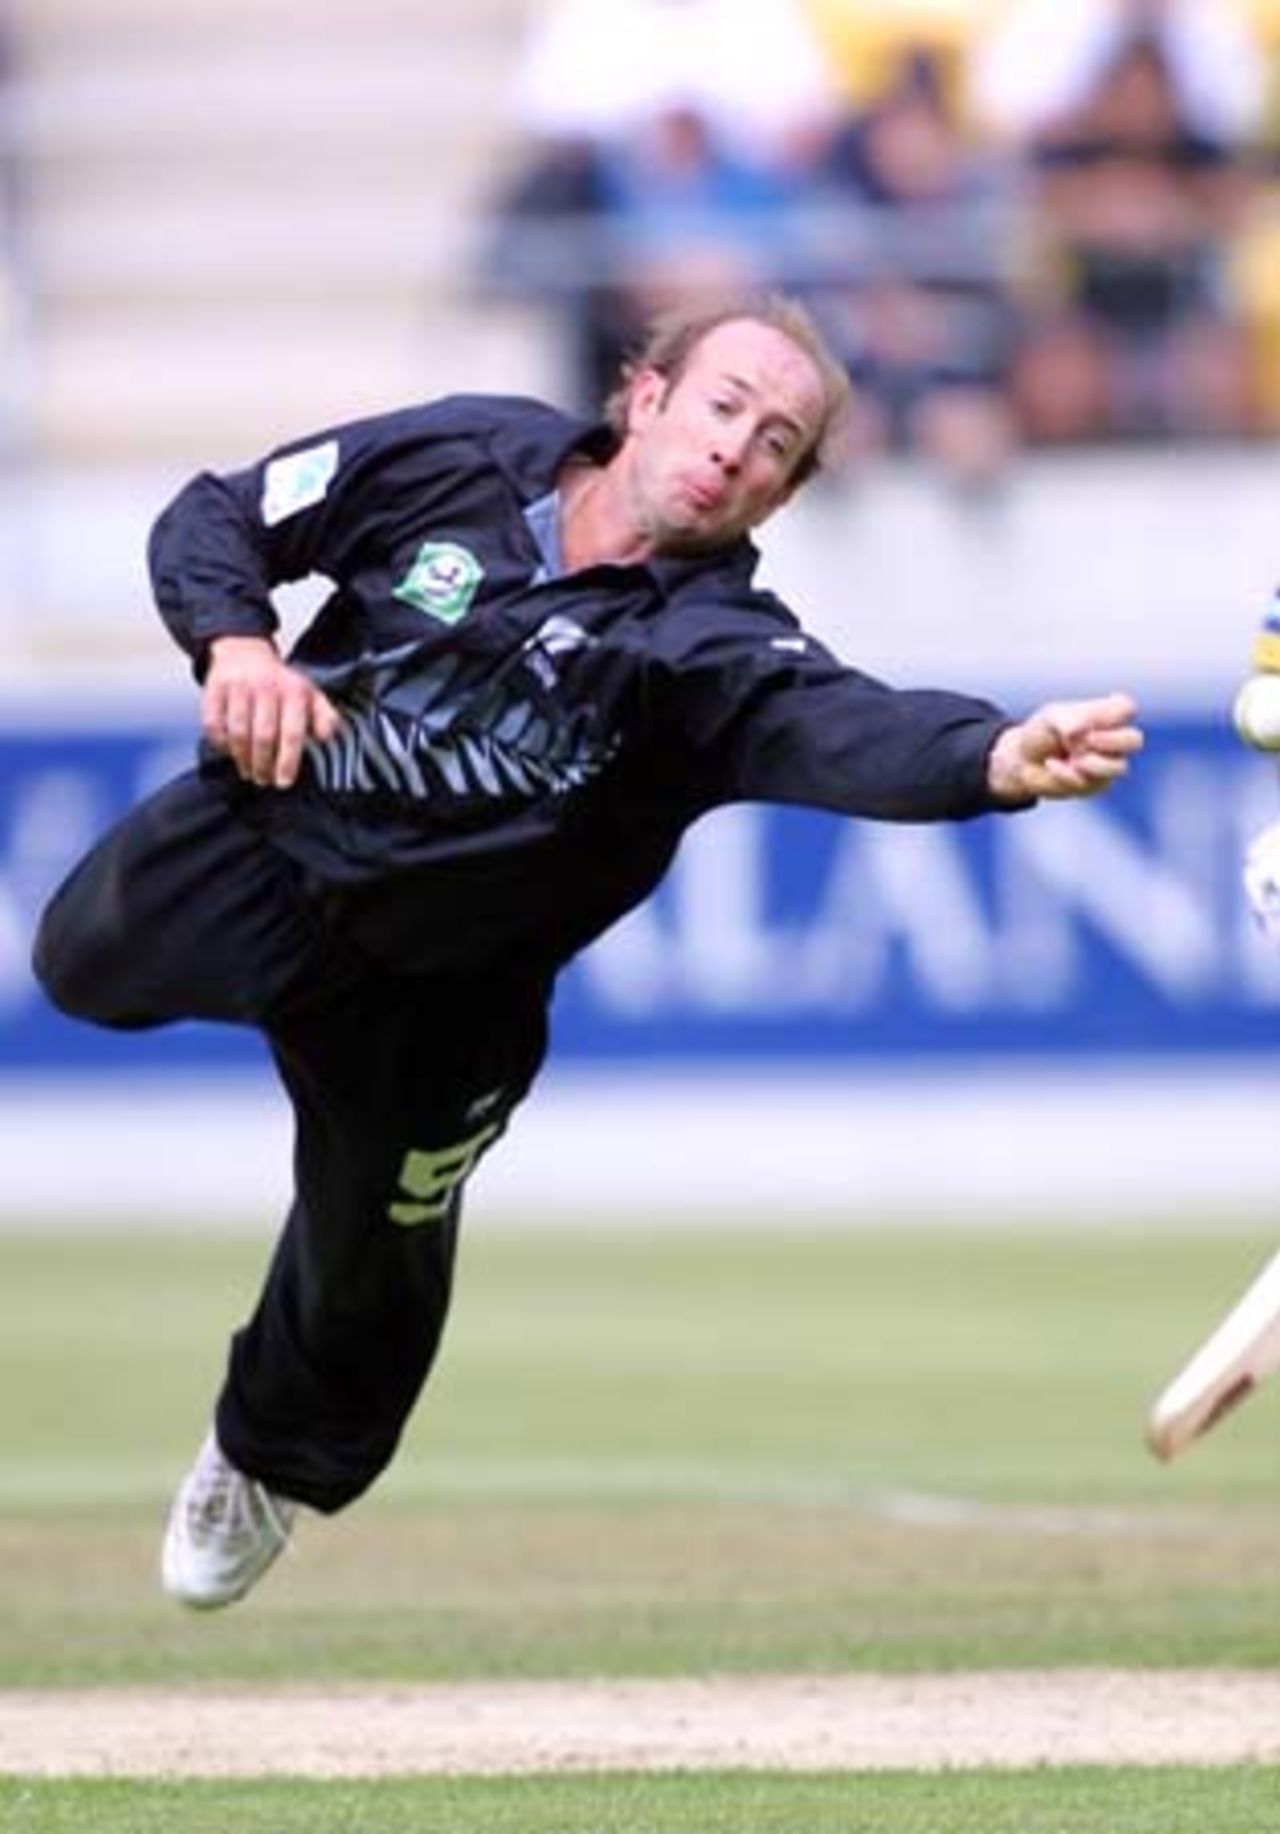 New Zealand medium pace bowler Chris Harris dives athletically to his left to partially save a powerful shot from Pakistan batsman Inzamam-ul-Haq from his bowling. 3rd One-Day International: New Zealand v Pakistan at WestpacTrust Stadium, Wellington, 22 February 2001.